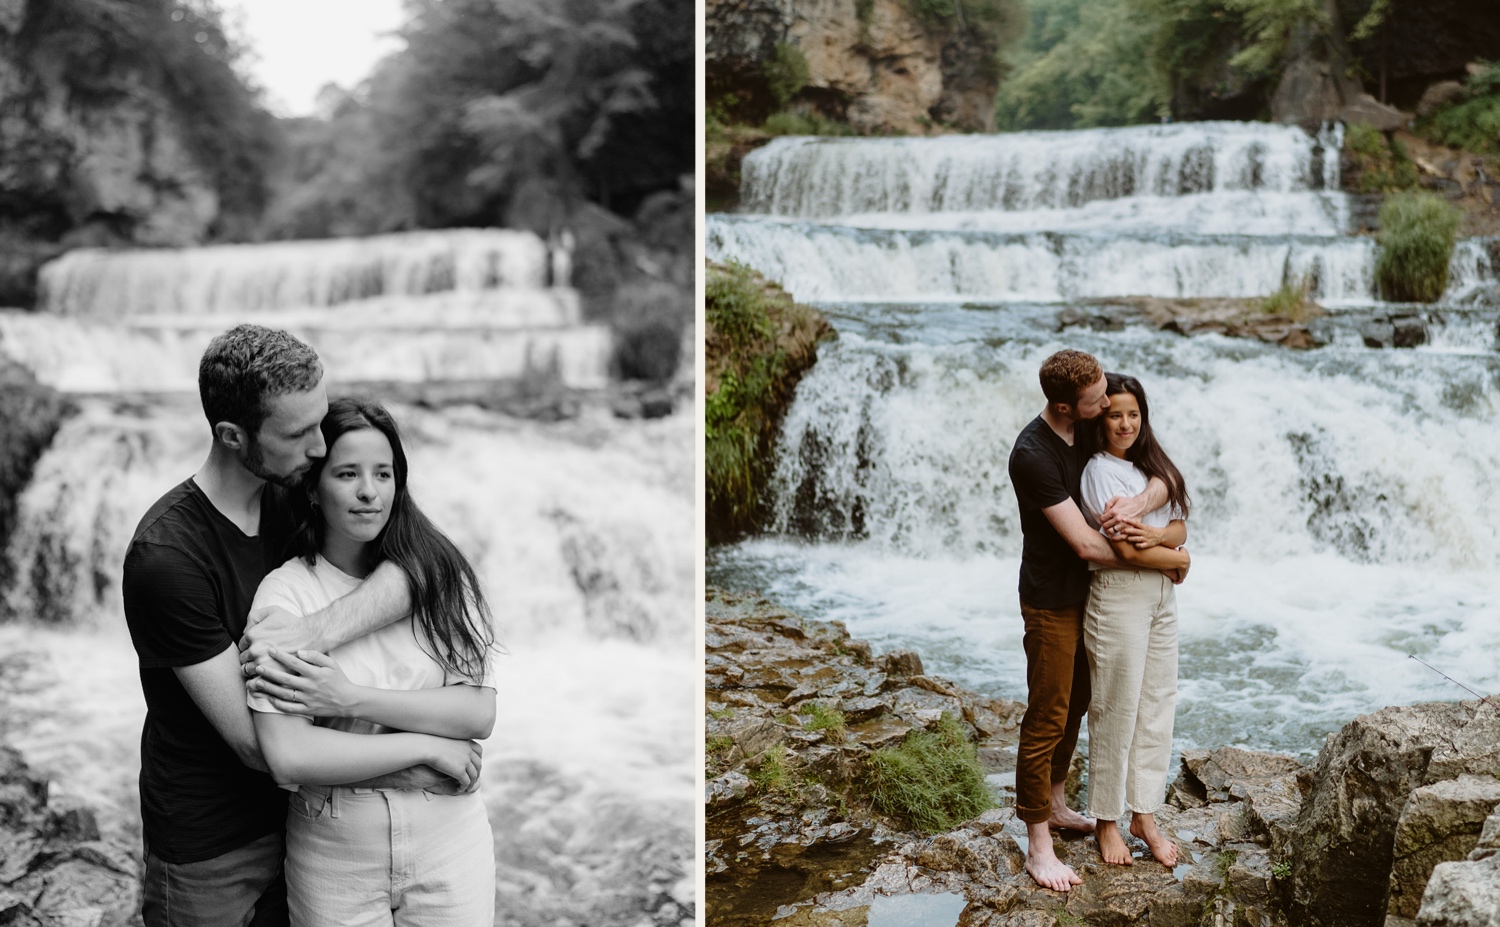 Summer photos of a couple for their anniversary at Willow River state park.